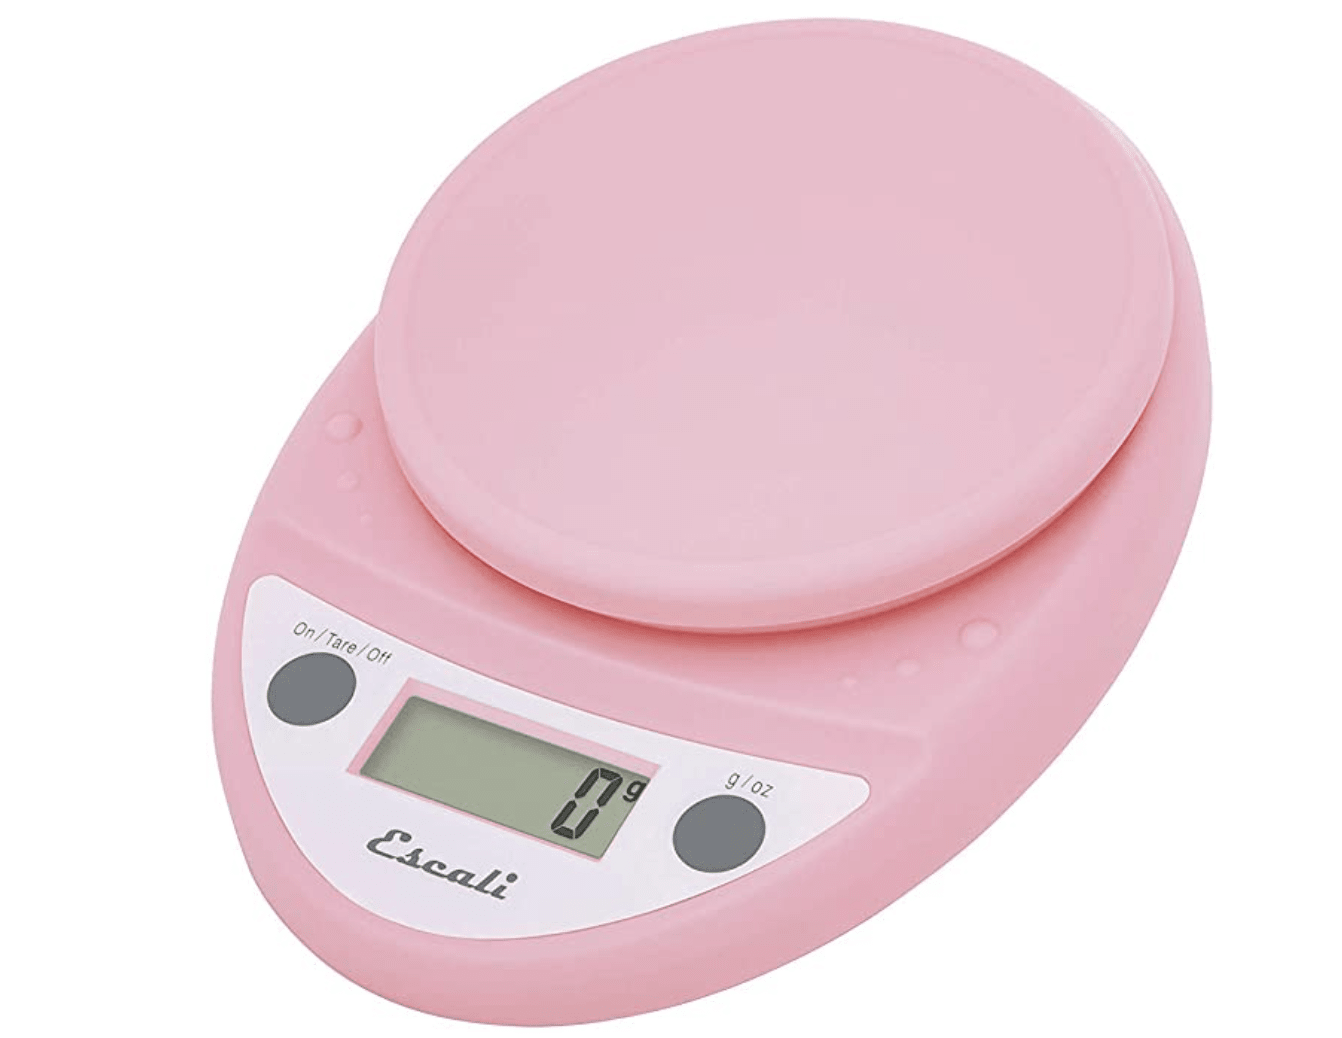 Blush Pink Food Scale - Digital Display Shows Weight in Grams